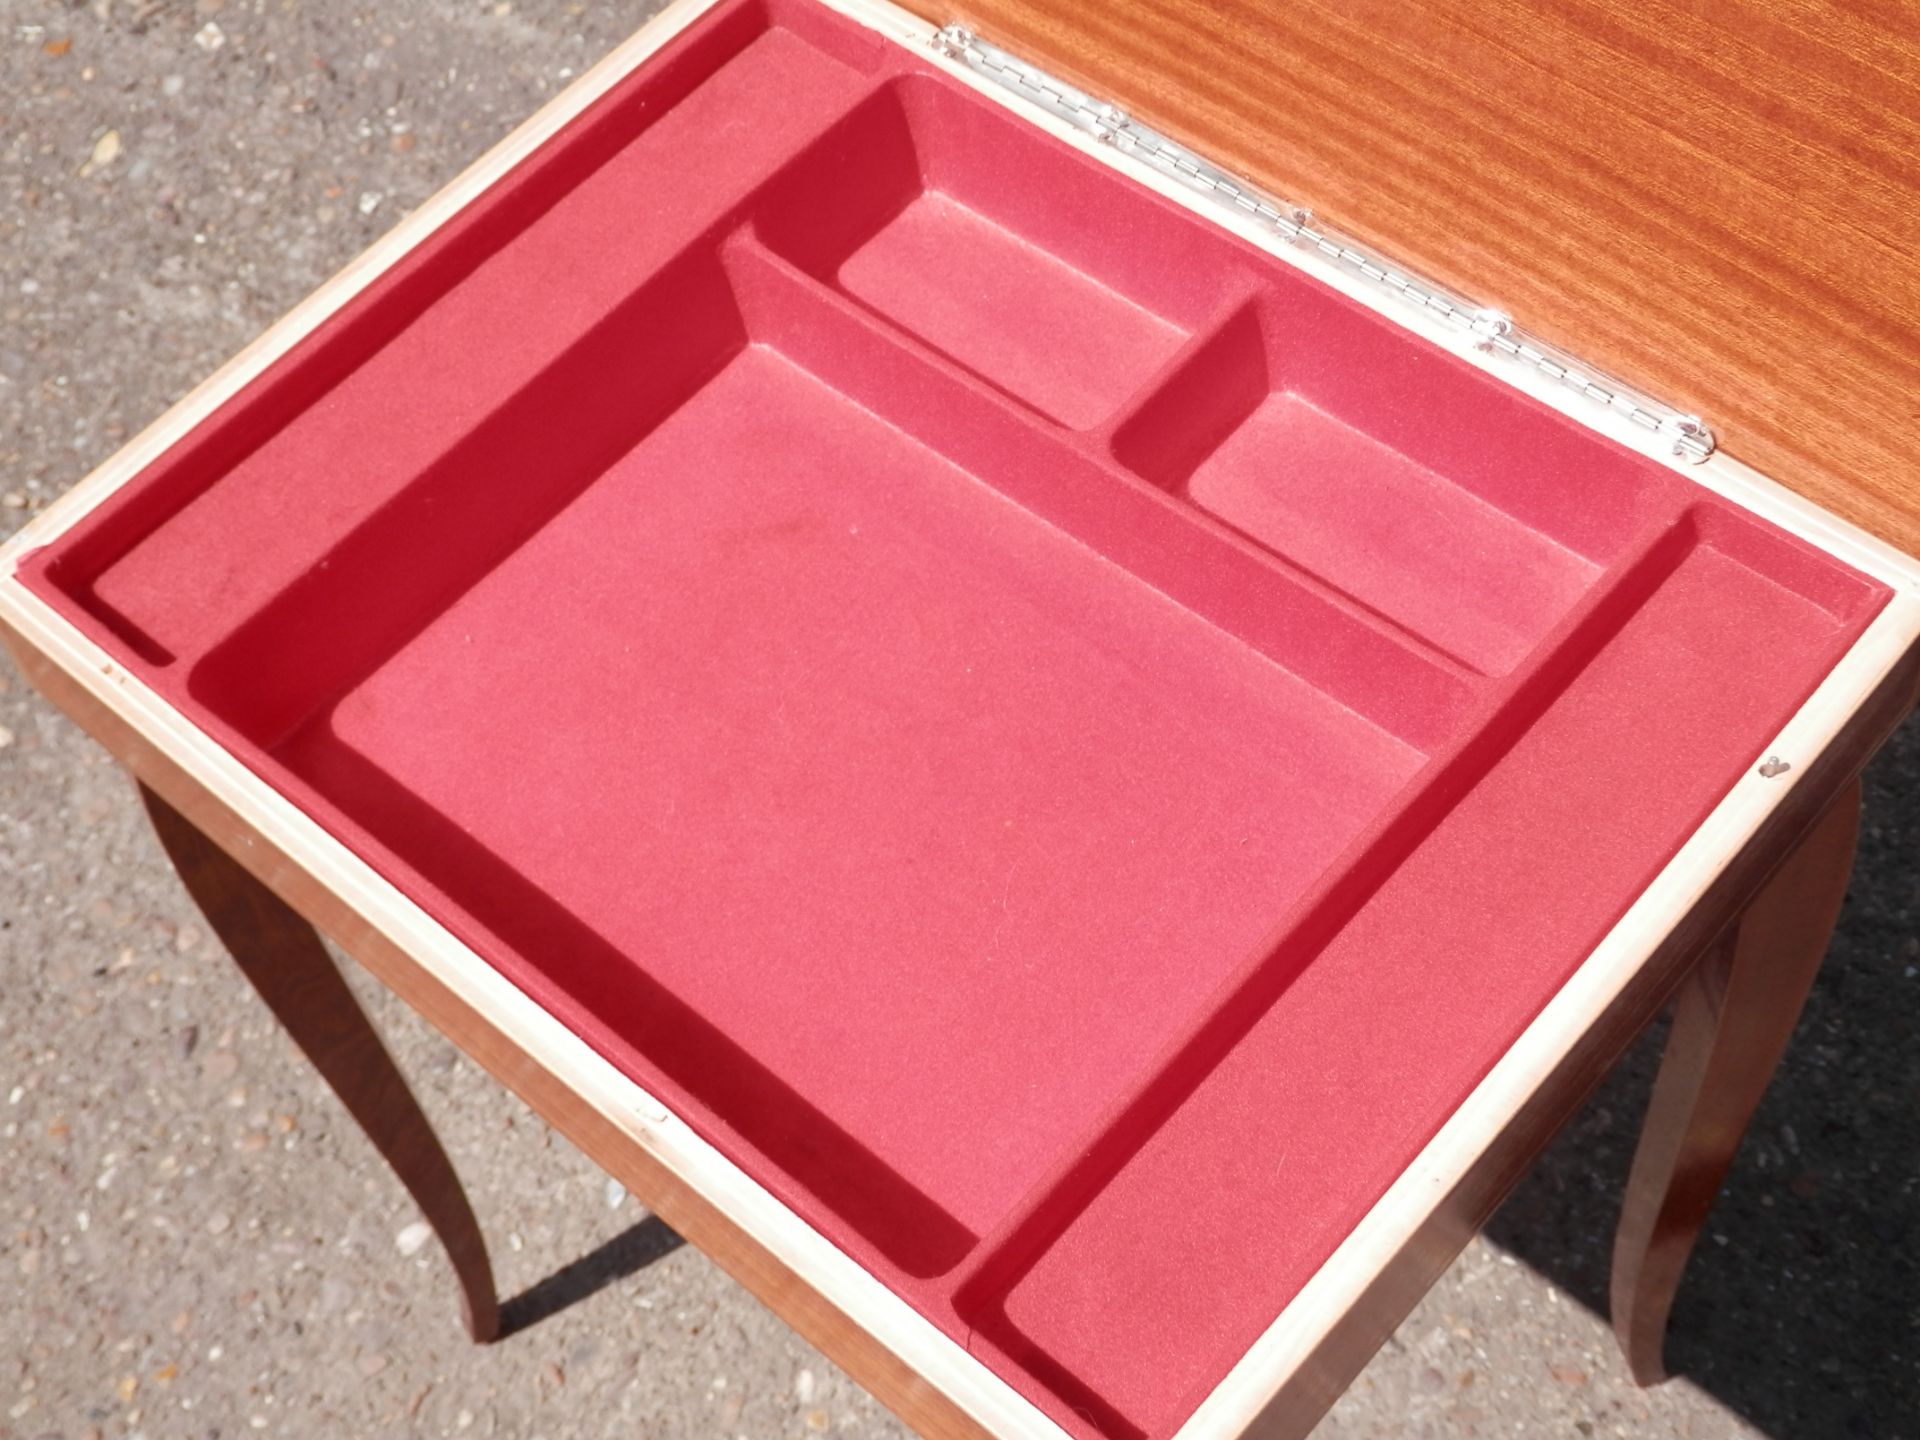 SEE VIDEO. BEAUTIFUL 1960S ITALIAN 13" X 17" MUSICAL TABLE, 20" HIGH, PLAYS "RAINDROPS" WHEN OPENED. - Image 6 of 7